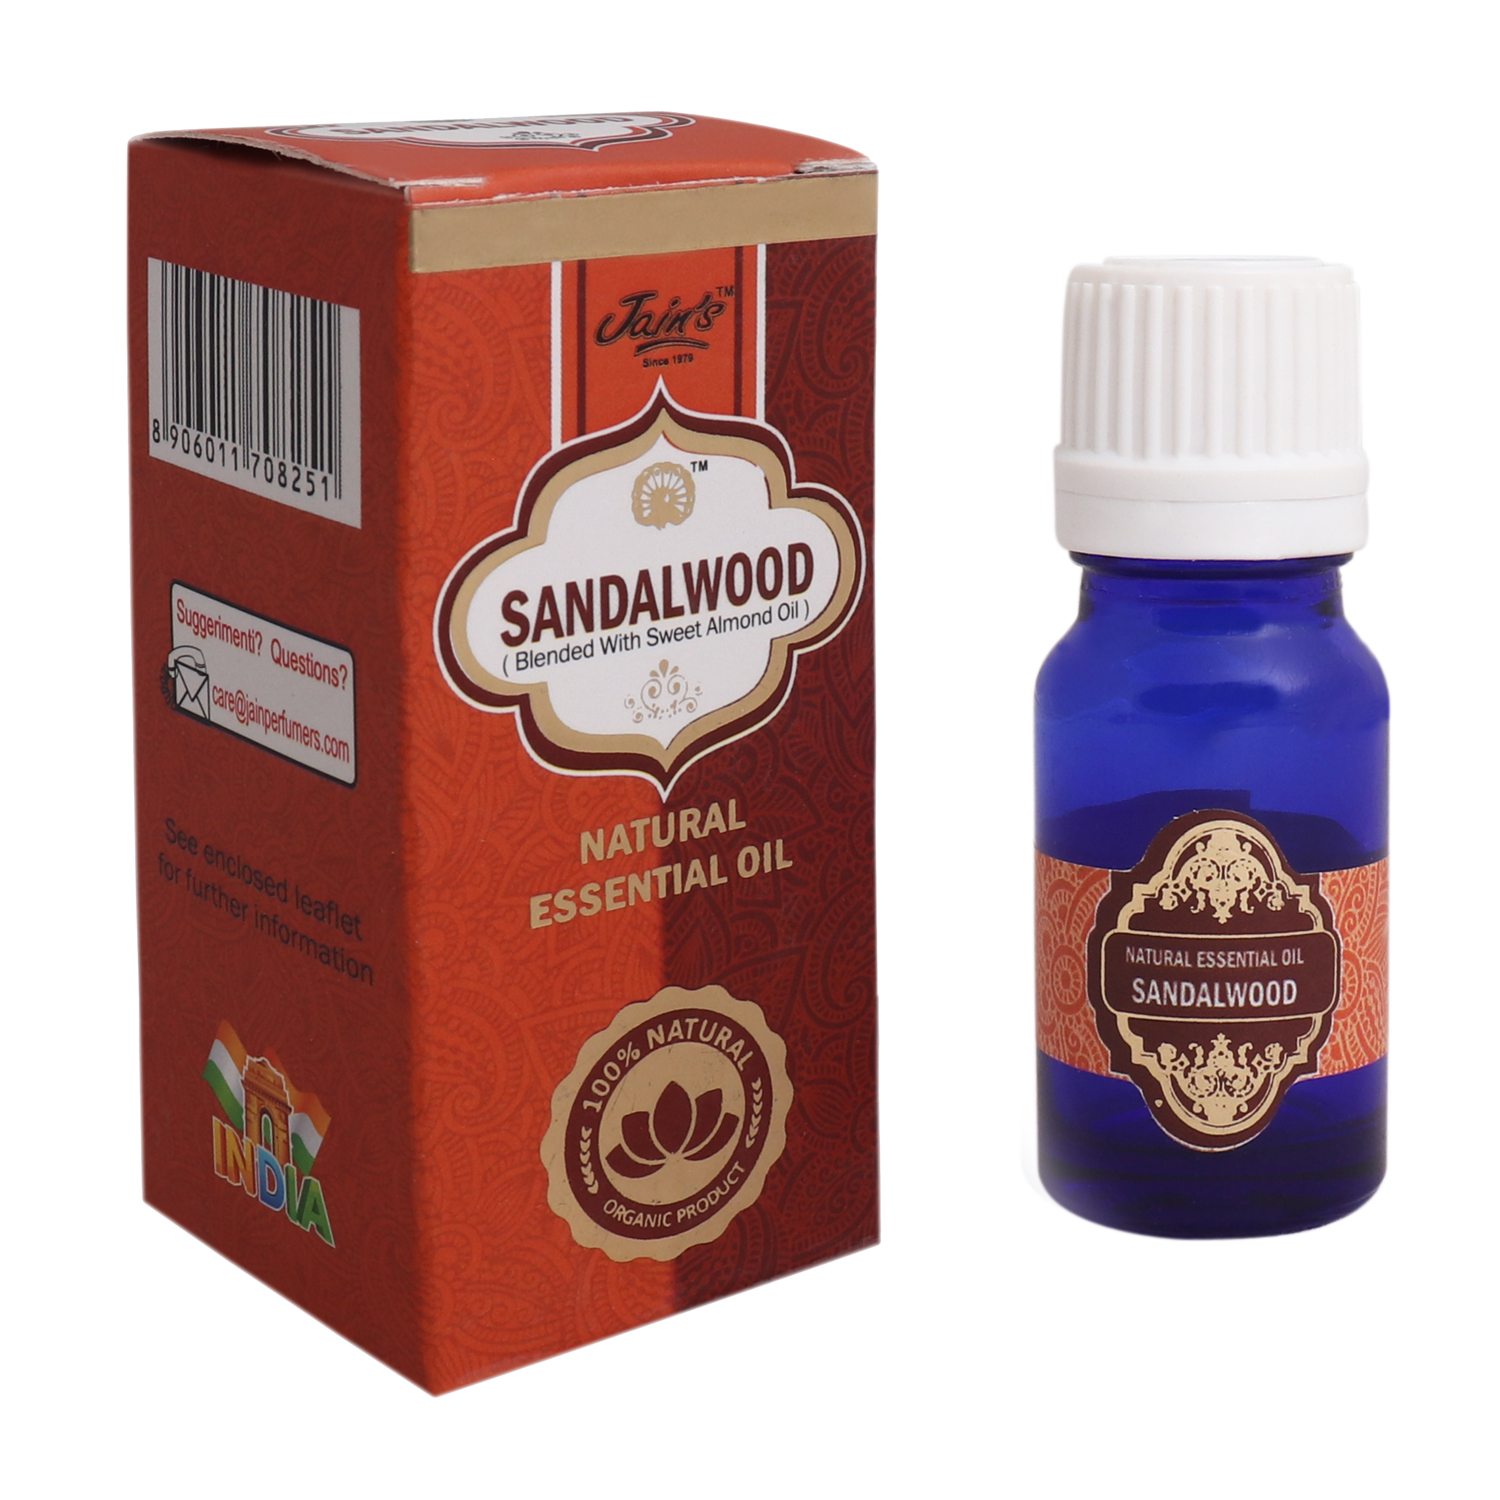 SANDALWOOD (BLENDED WITH SWEET ALMOND) OIL